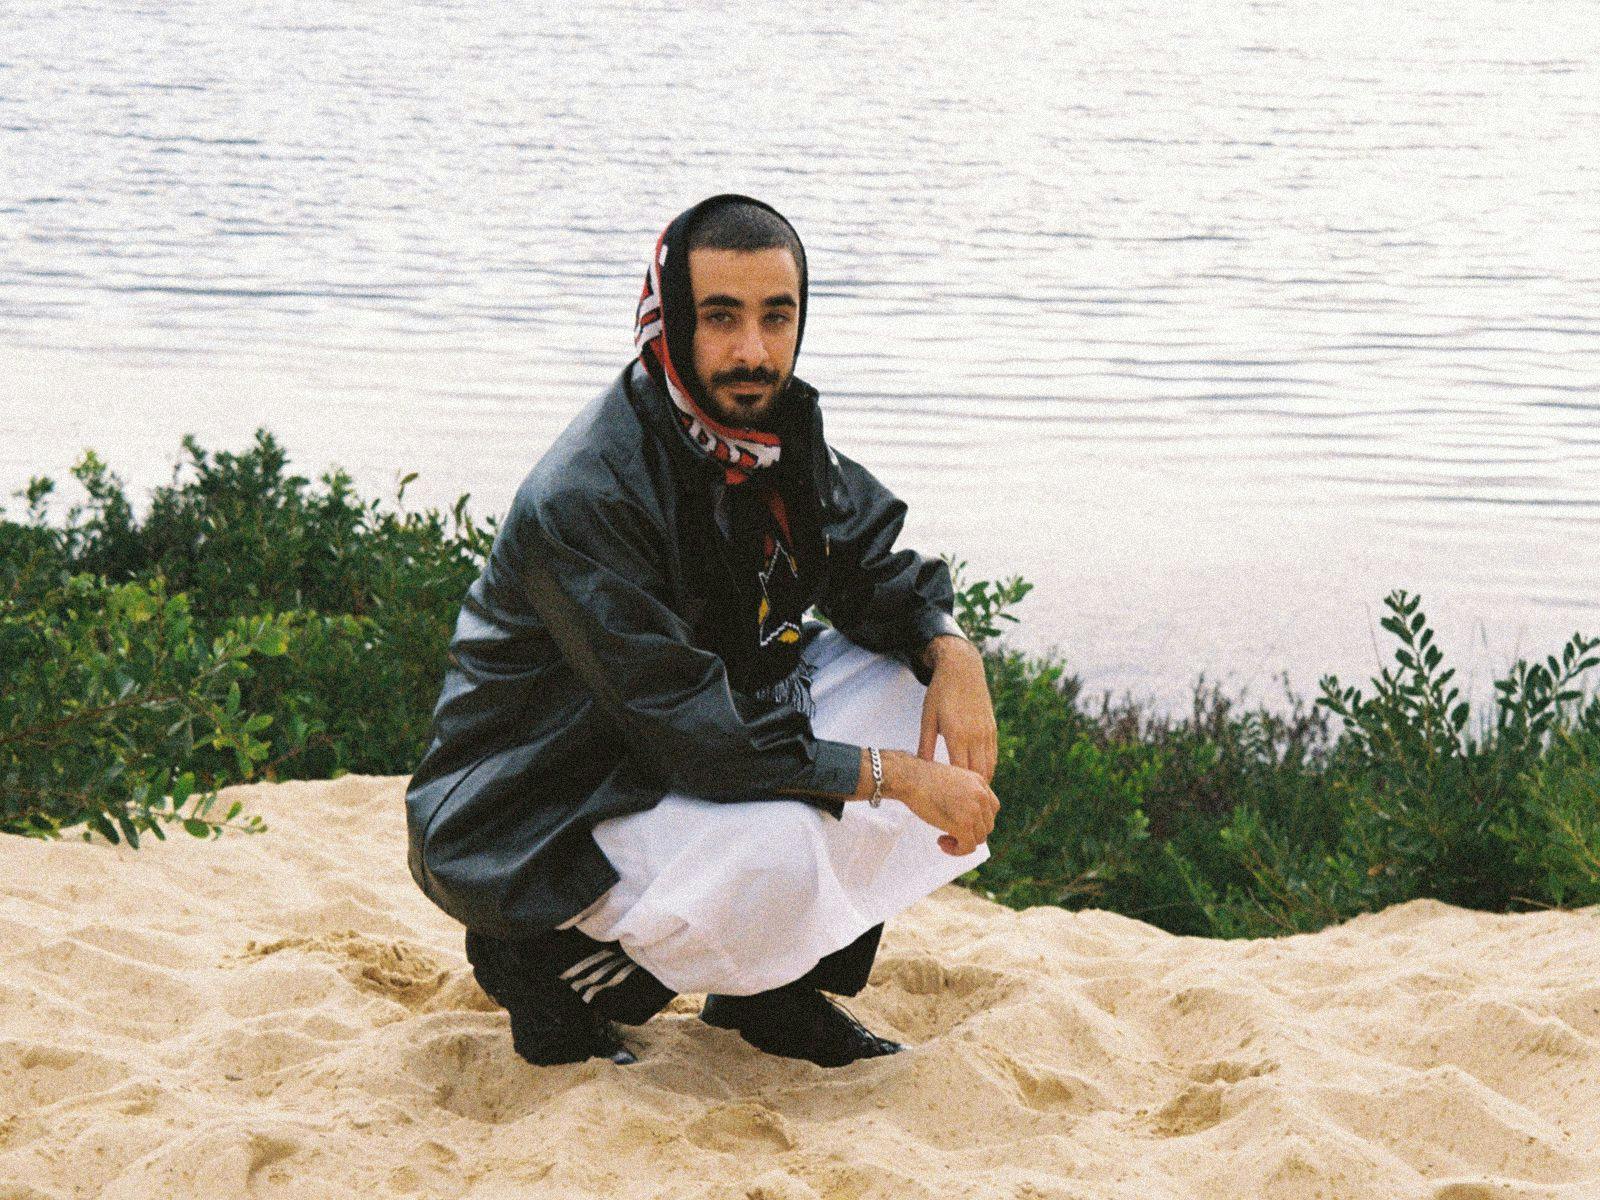 Moktar crouched on the ground at a beach.